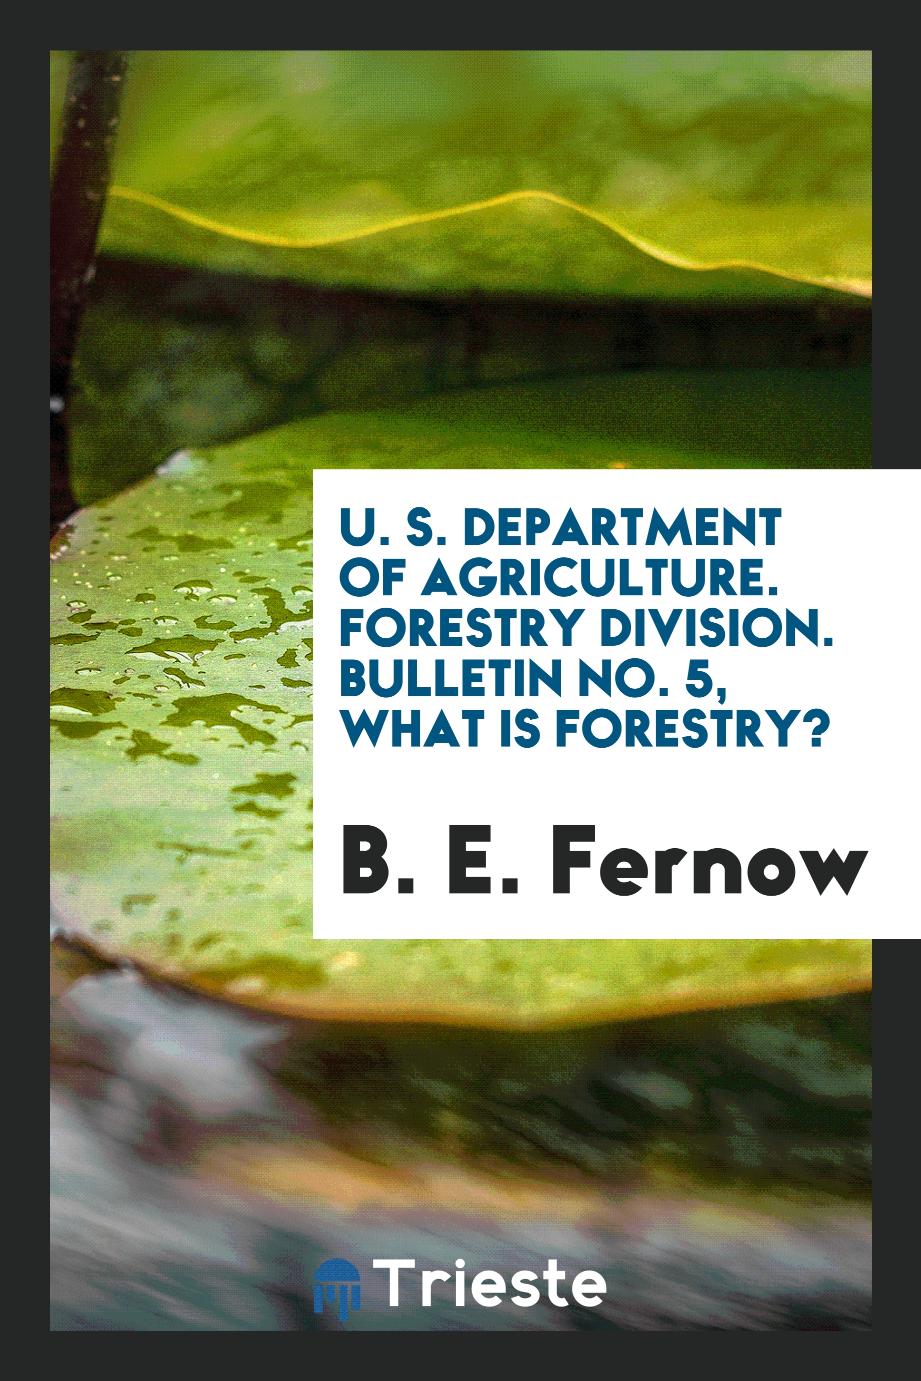 U. S. Department of agriculture. Forestry division. Bulletin No. 5, What is Forestry?